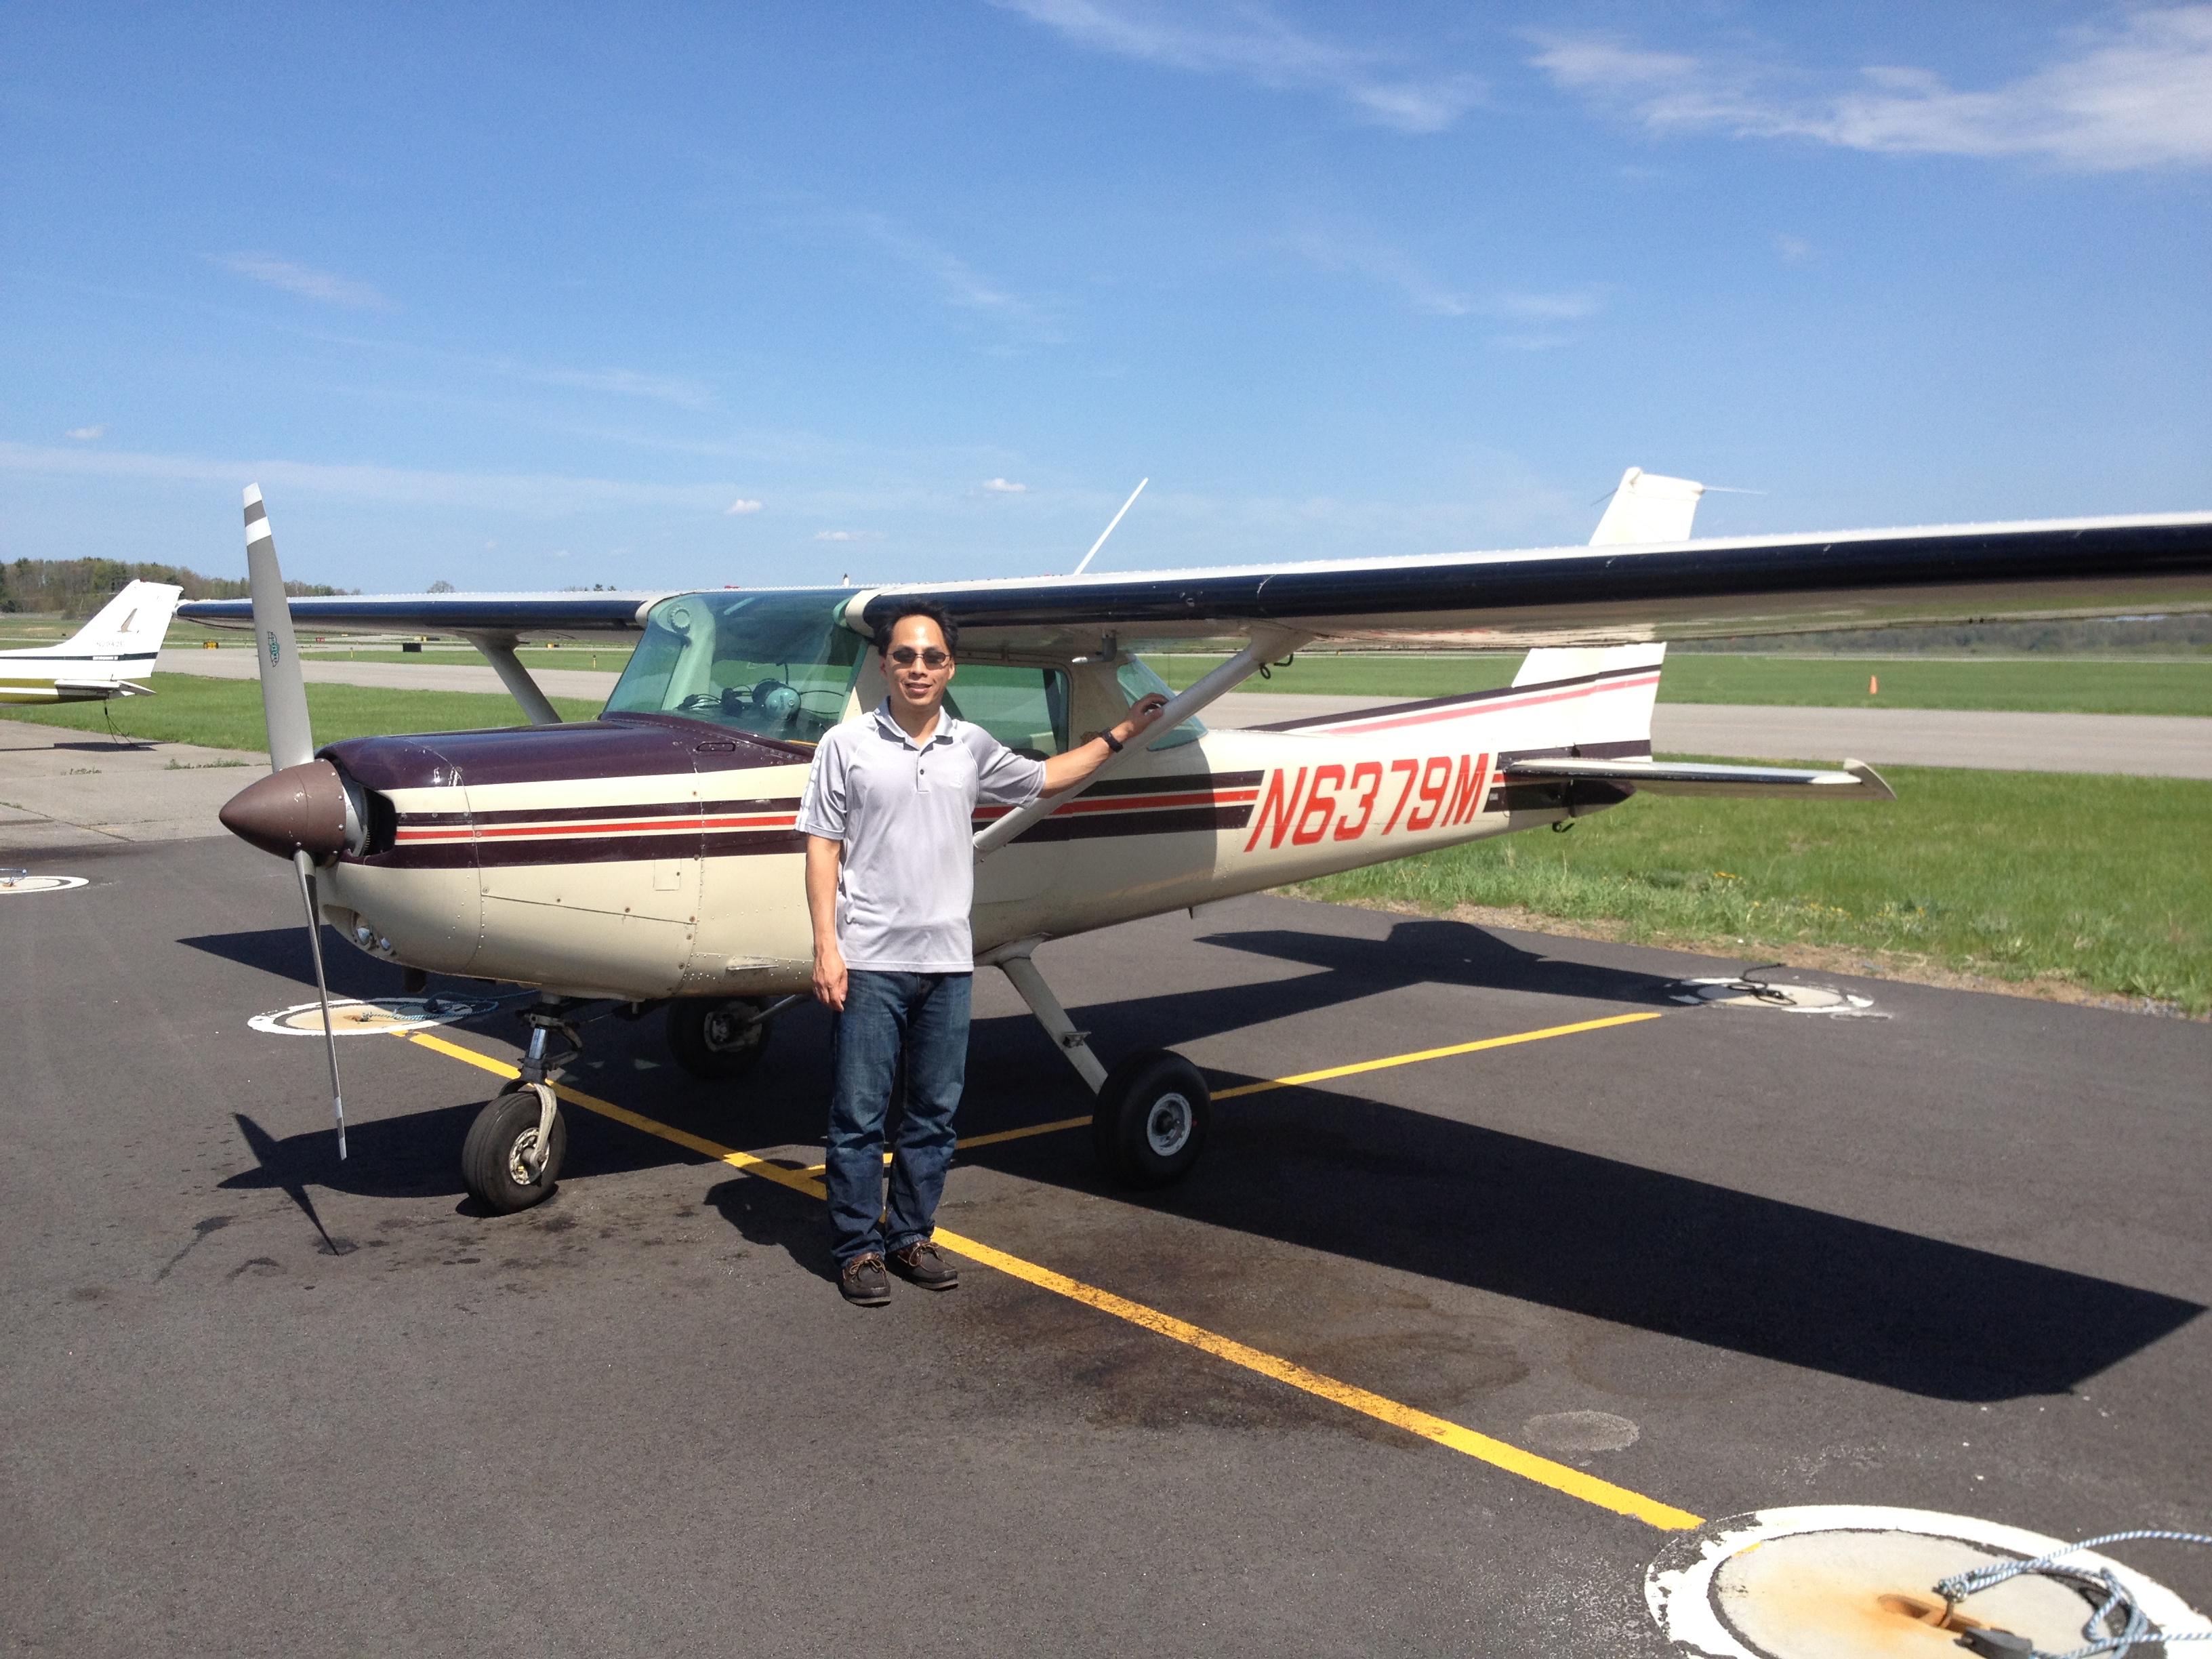 Brian with his plane